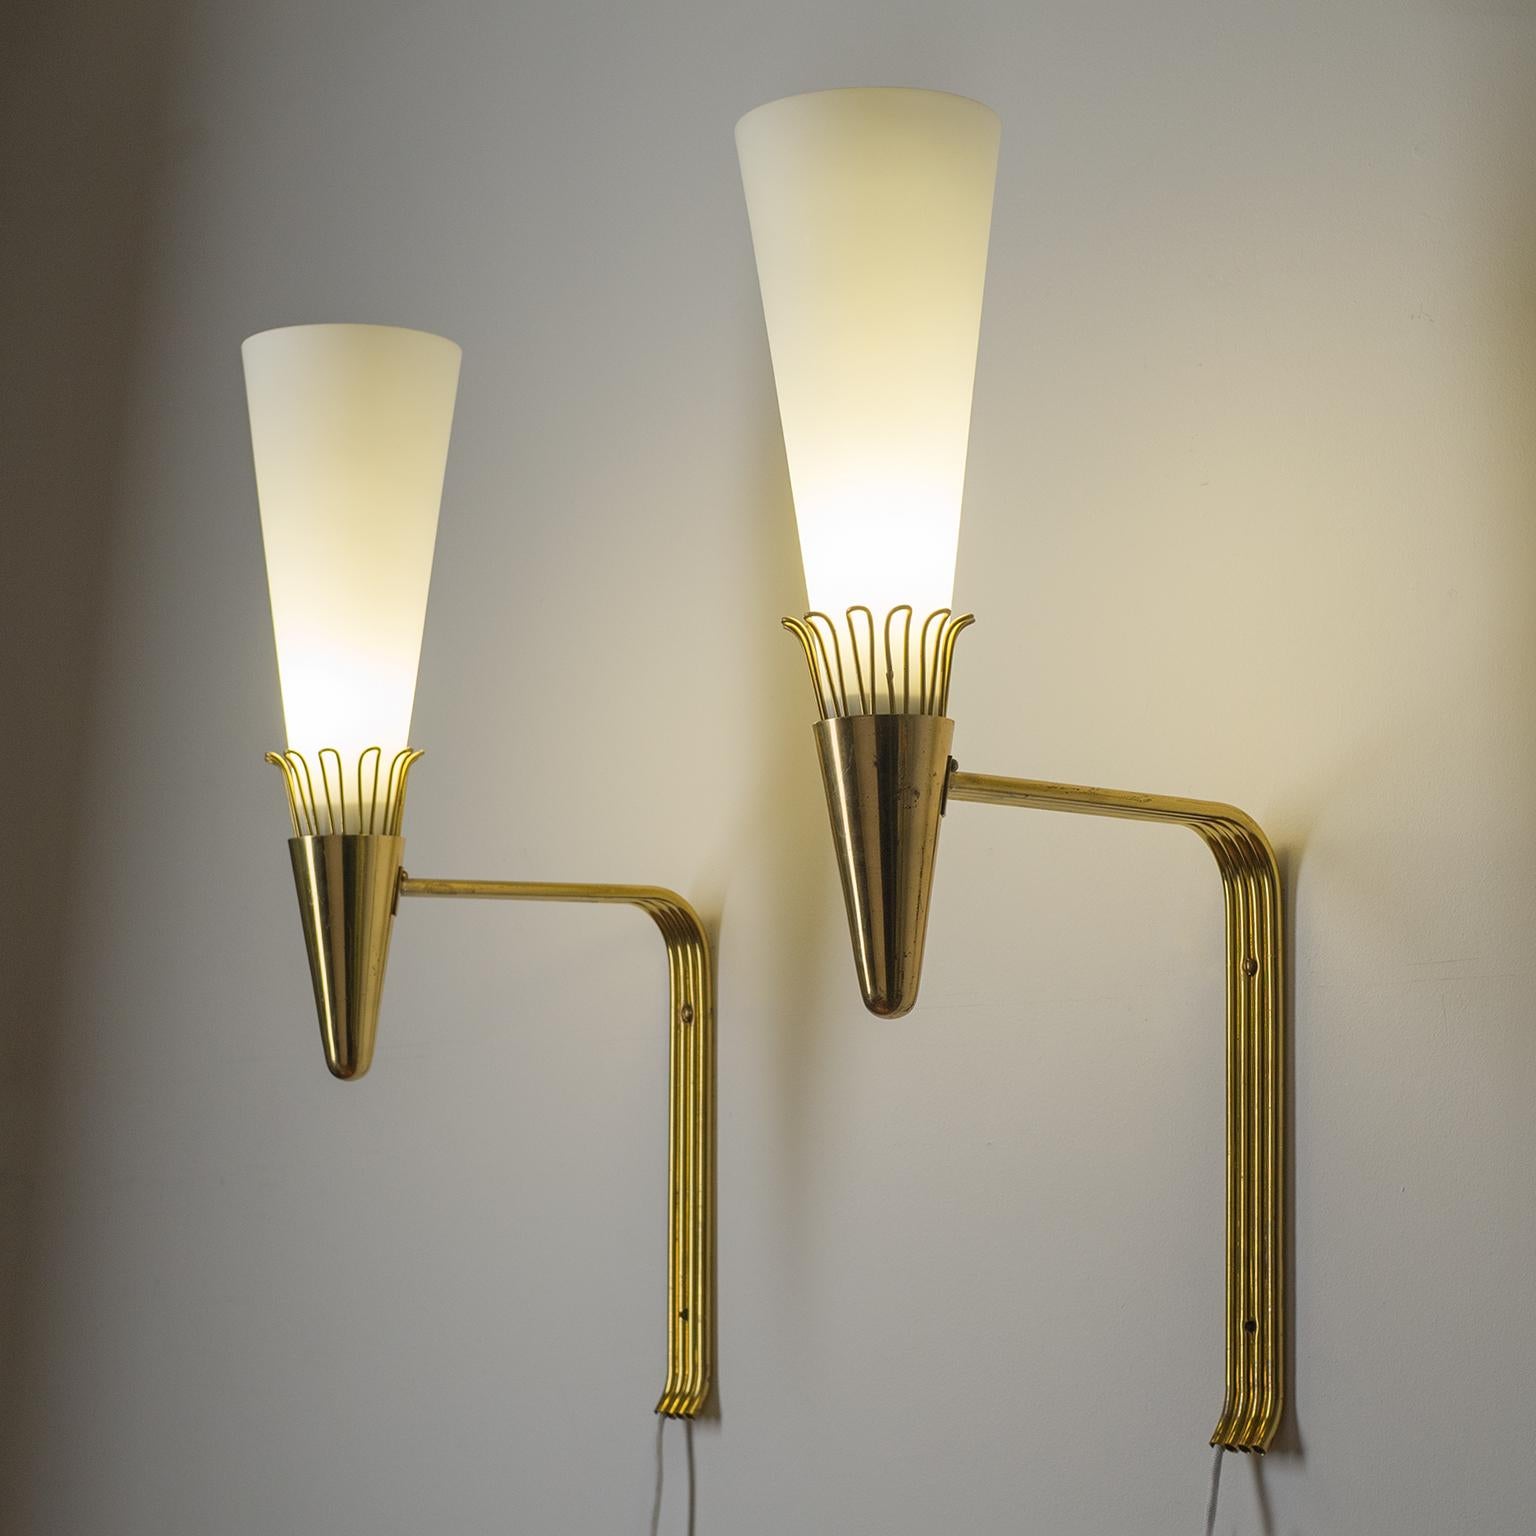 Rare pair of very large brass and satin glass wall lights by Itsu, Finland, circa 1960. Remarkable modernist design in good original condition with patina on the brass. One original bakelite E27 socket with new textile wiring. Manufacturers stamp on